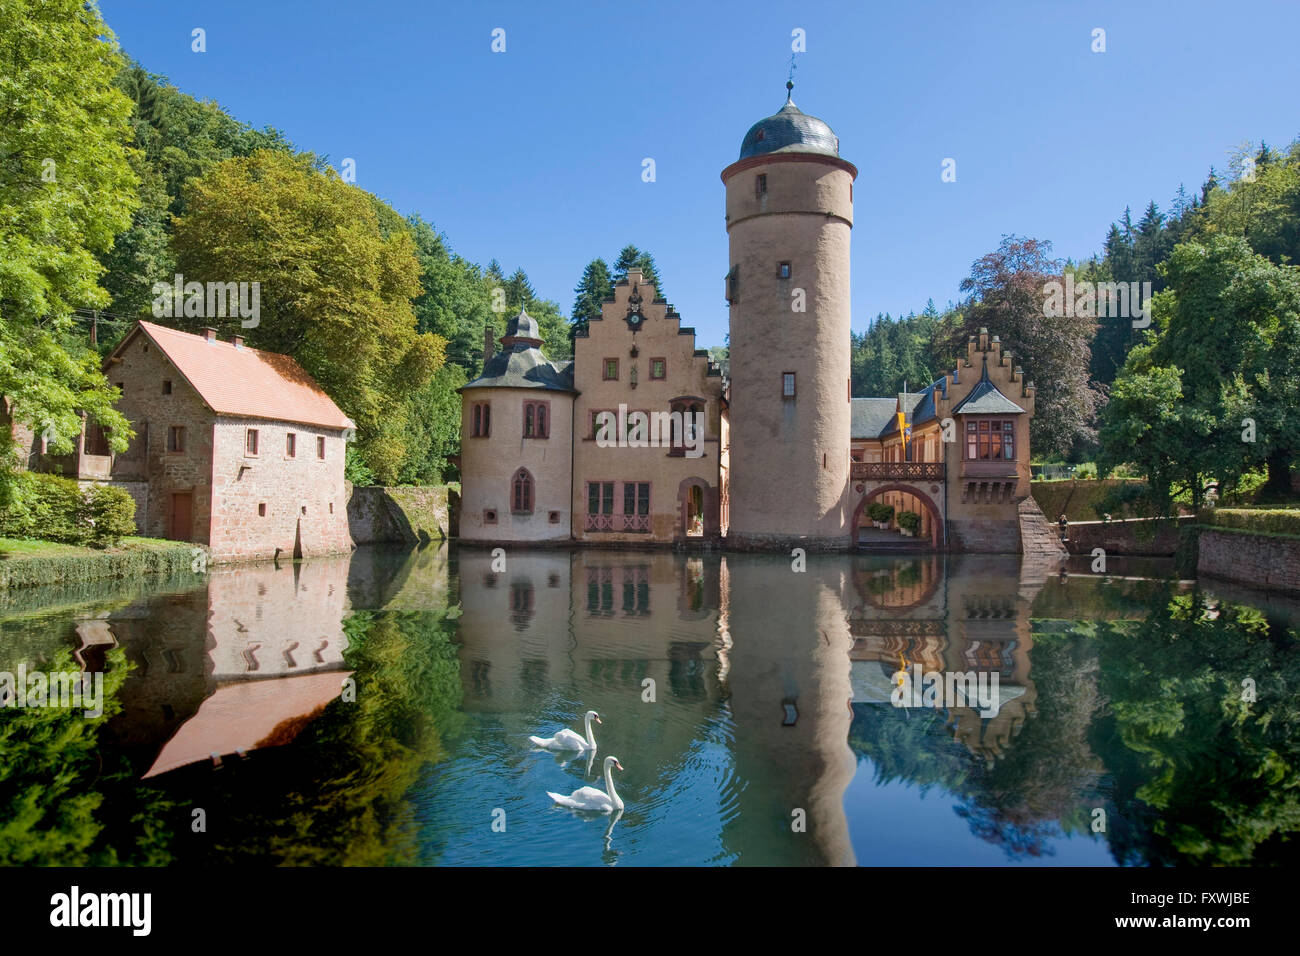 The moated castle Mespelbrunn lies in an isolated side valley of the Elsava valley in the Spessart, Bavaria, Germany. Stock Photo